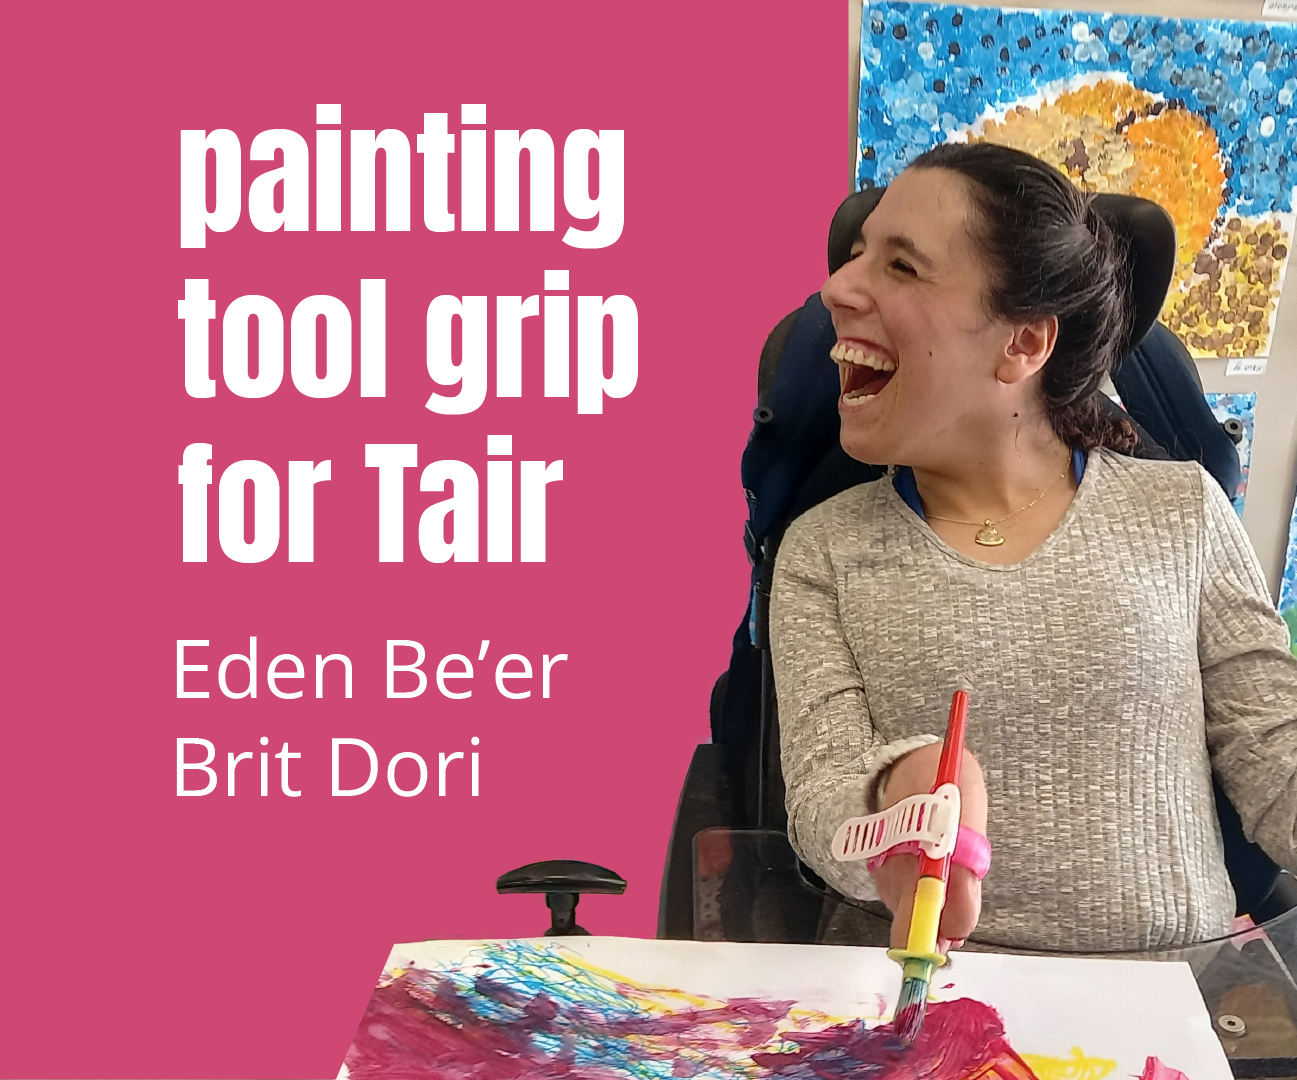 Painting Tool Grip for Tair